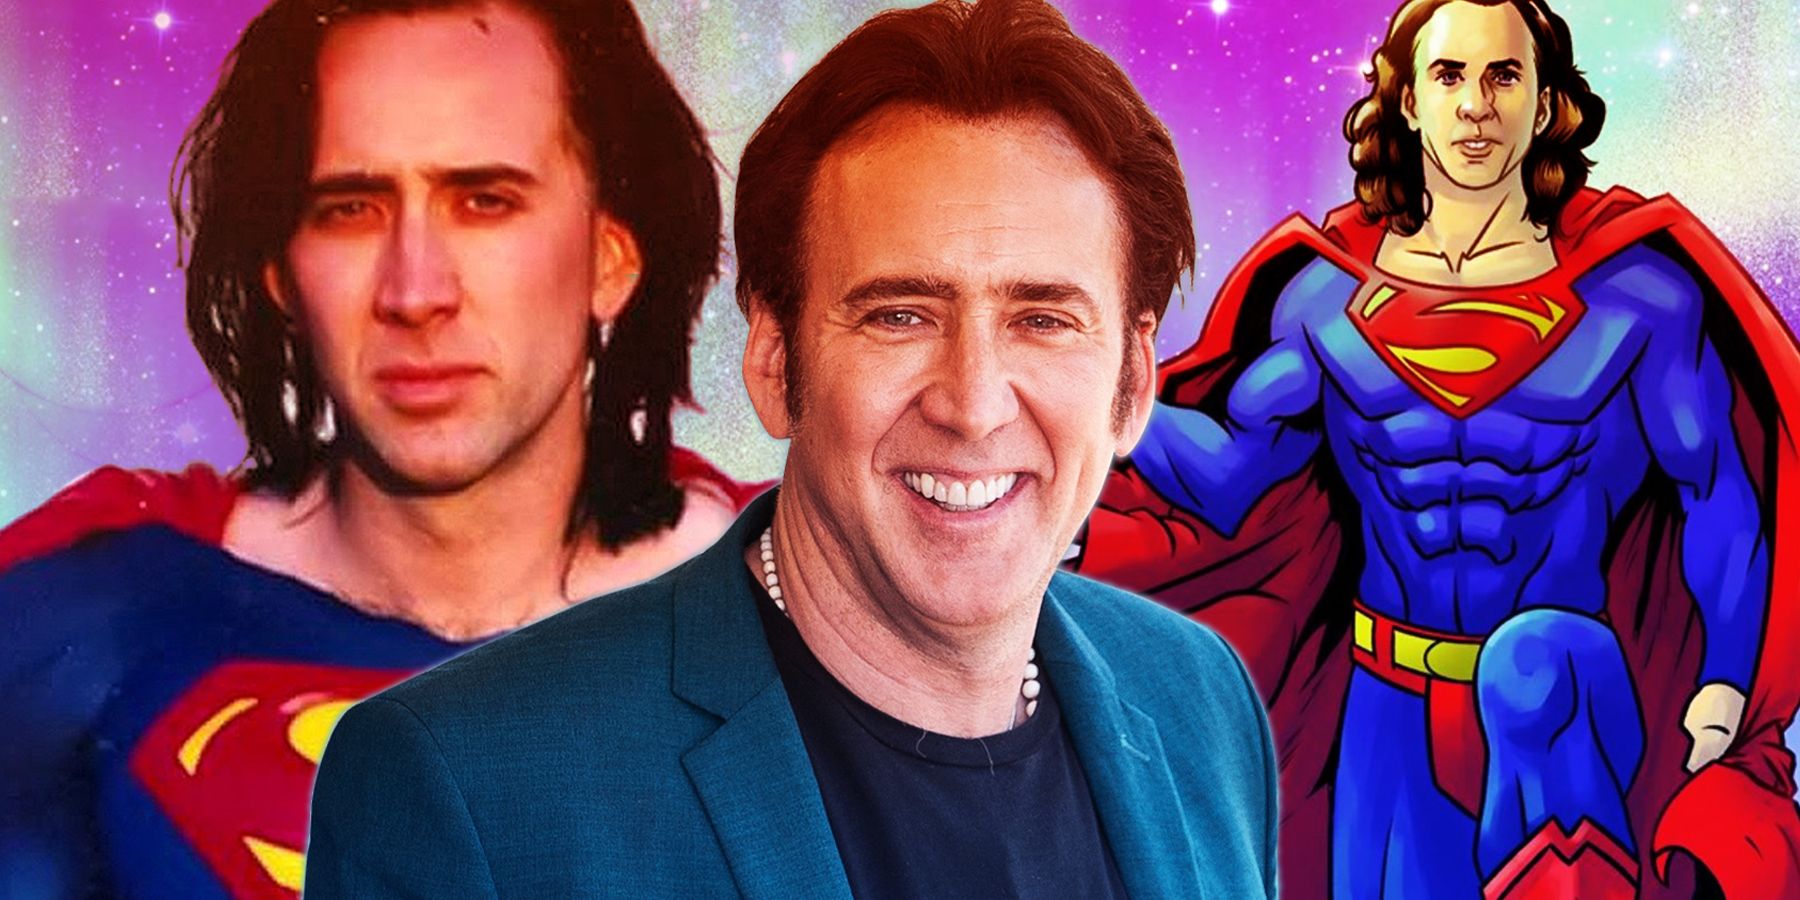 Nic Cage centering images of himself as Superman 